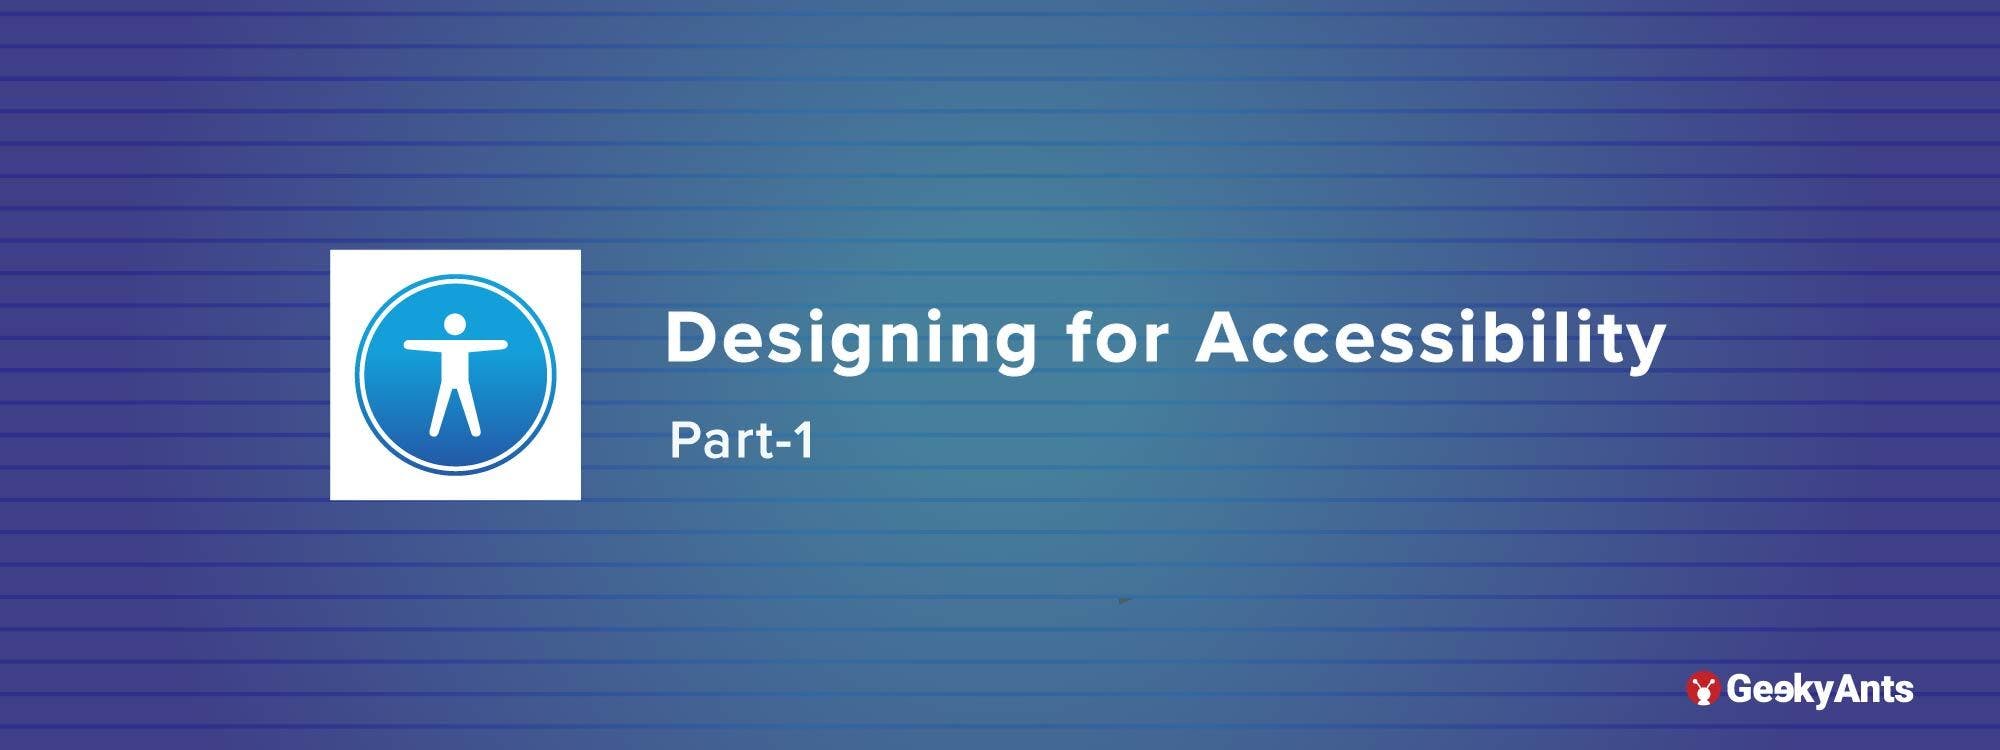 Designing for Accessibility(Part-1)